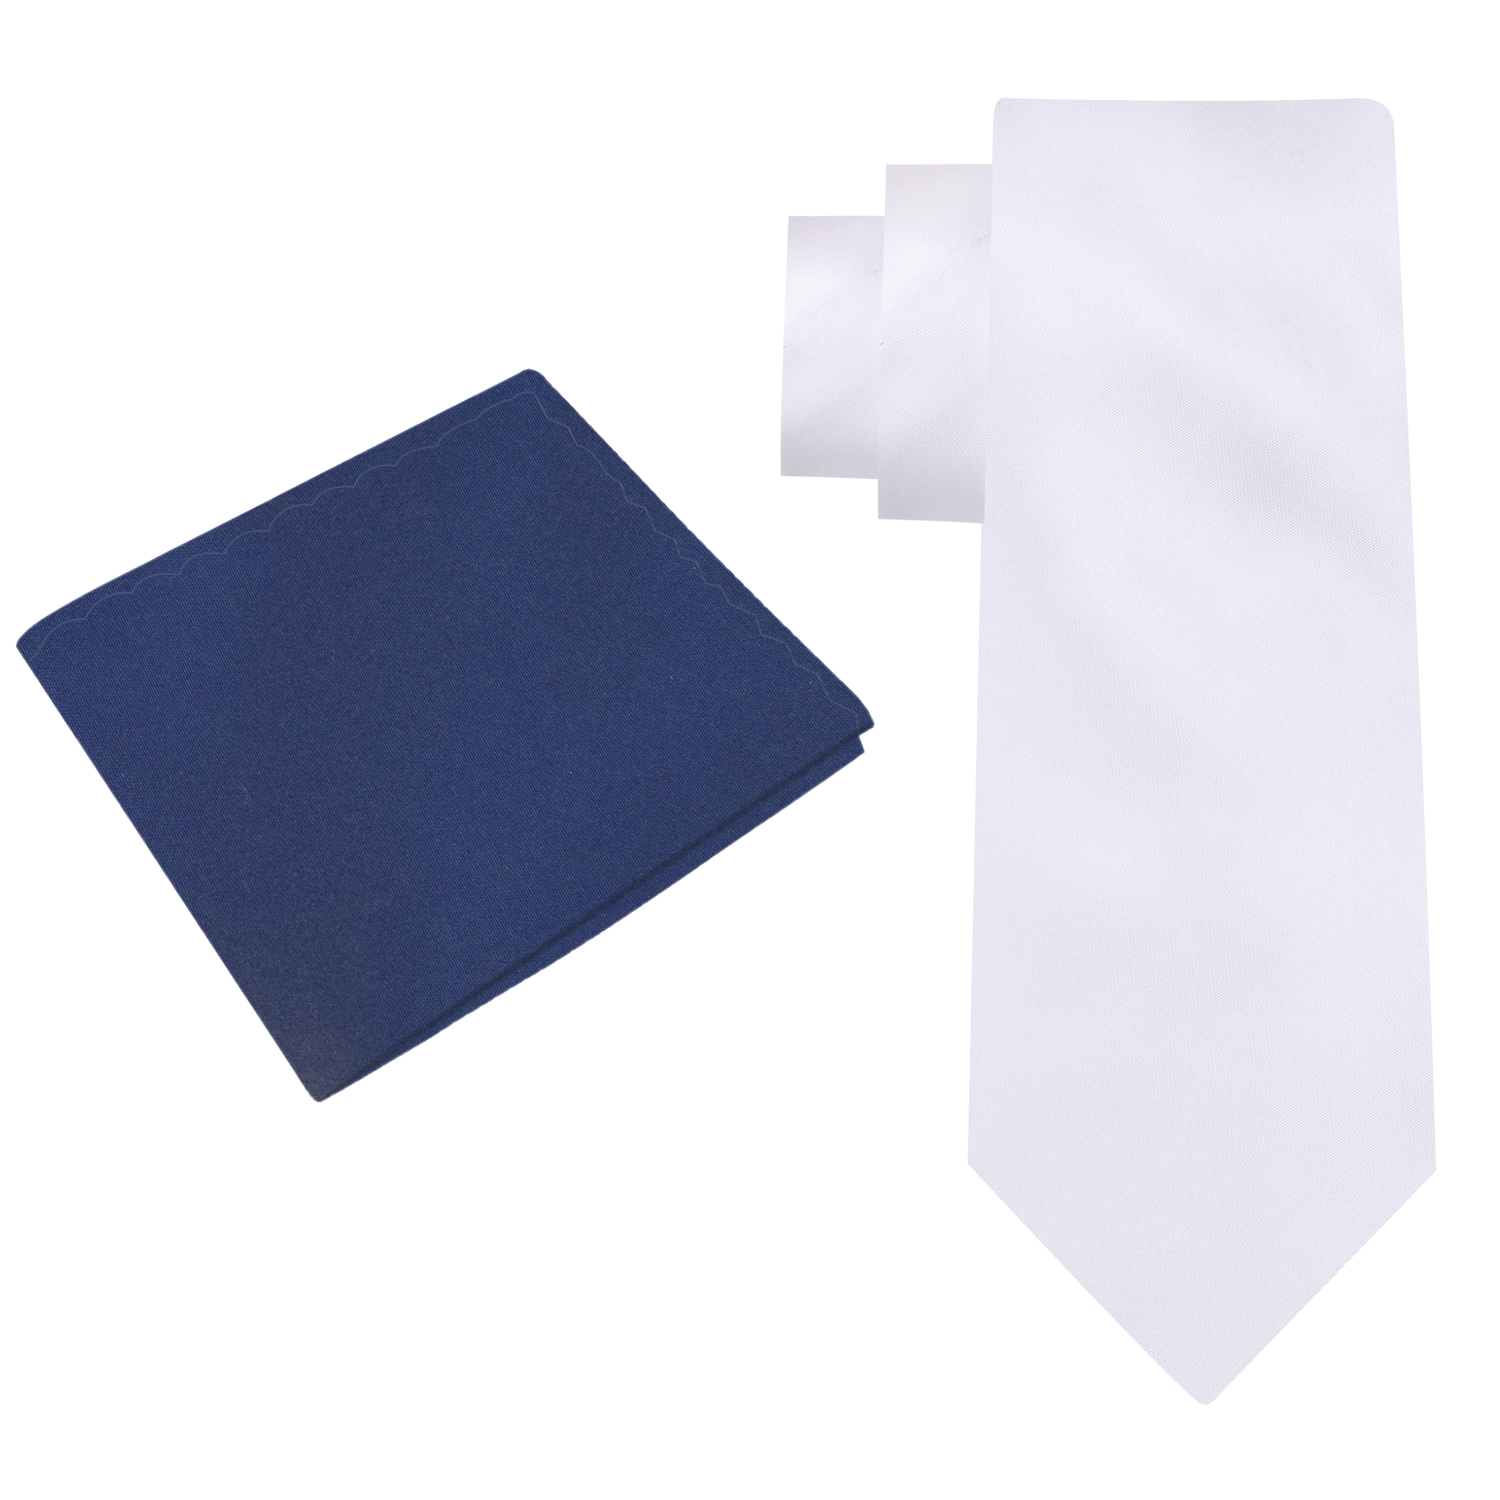 Alt View: Solid White Tie with Blue Square